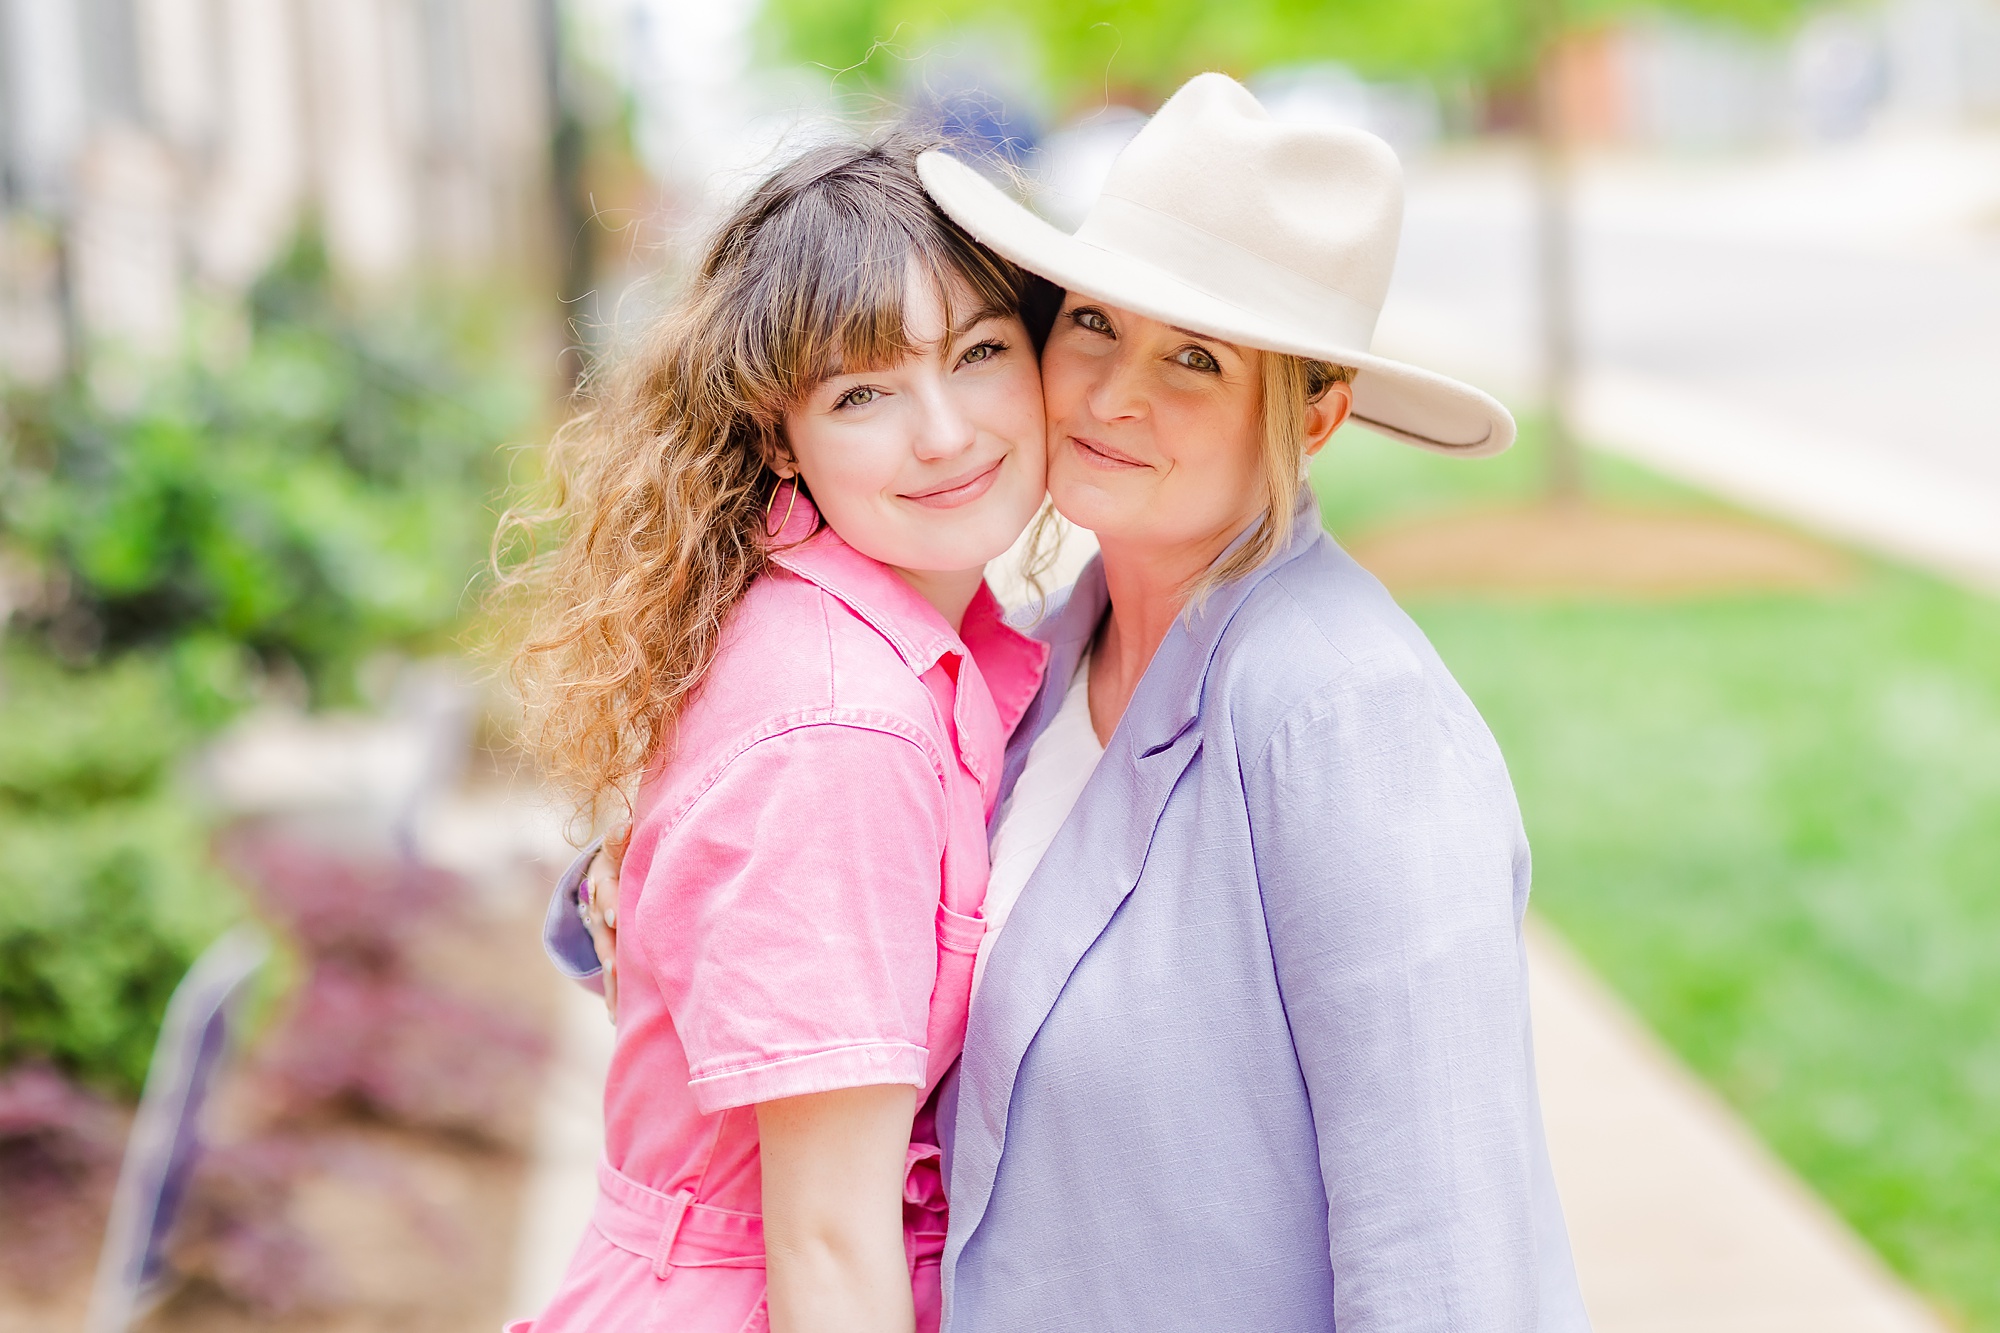 daughter hugs mom during branding photos for clothing business